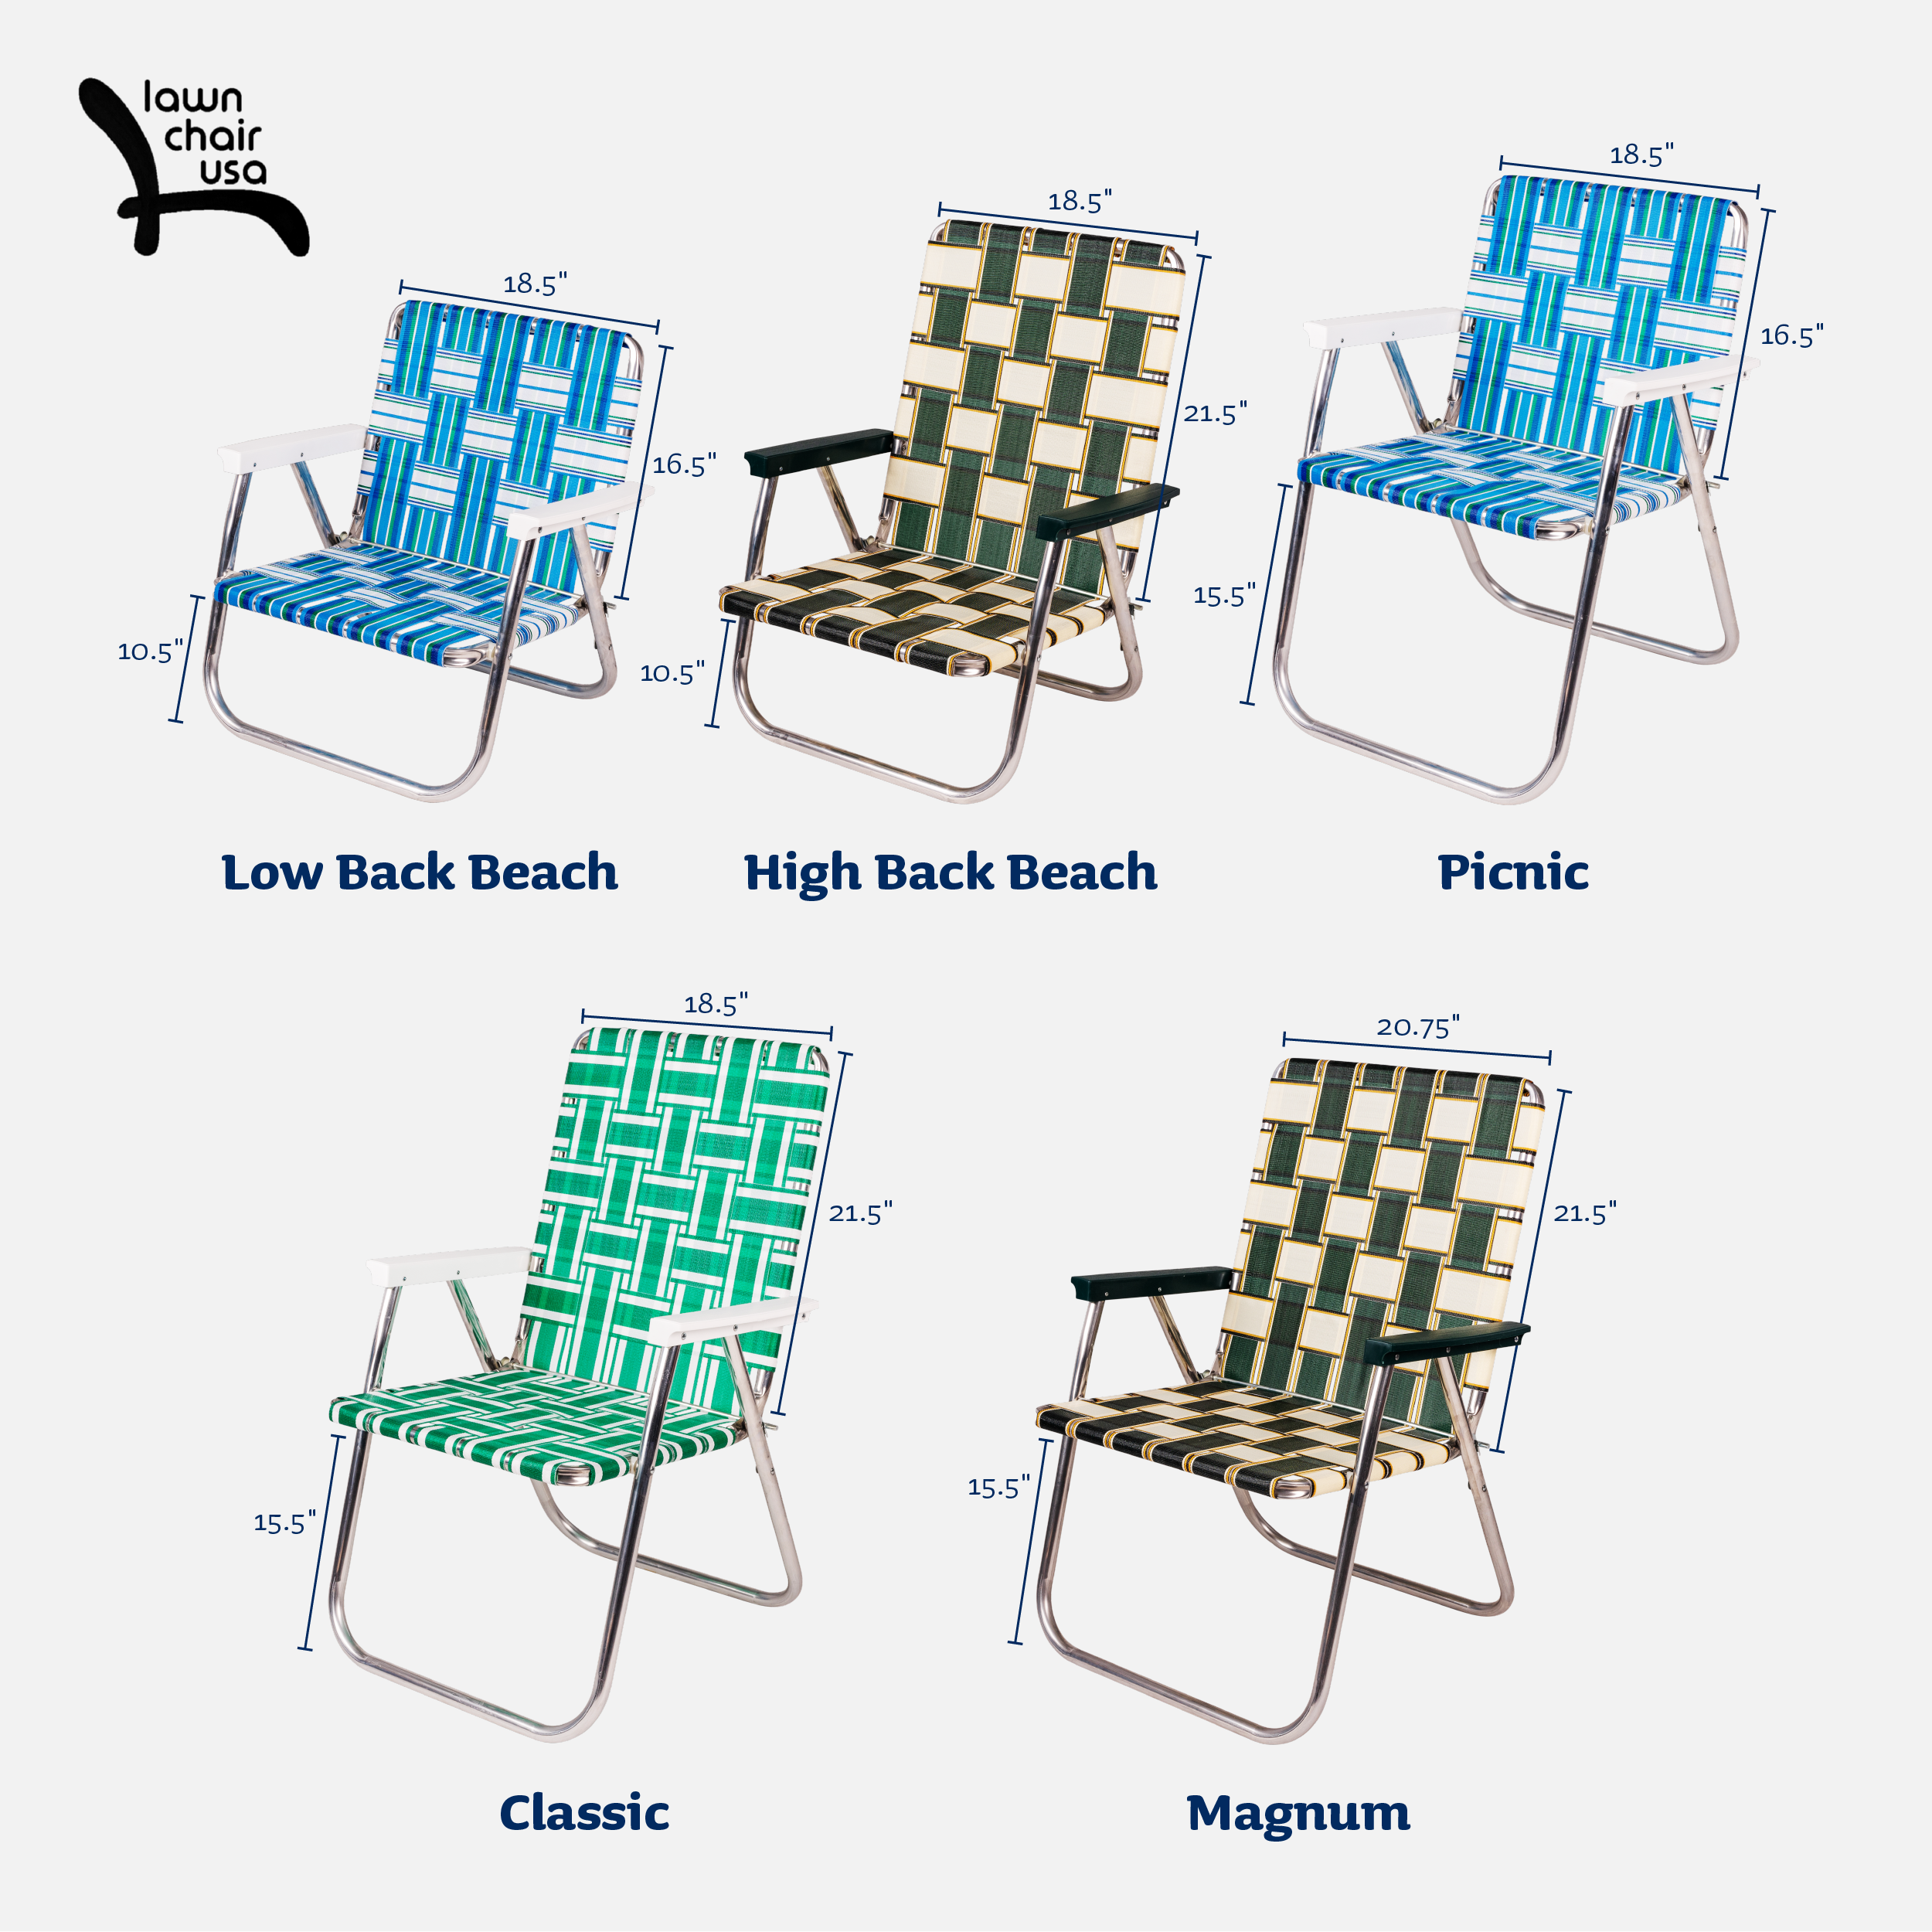 Lawn Chair USA American Made Folding Lightweight Aluminum Webbing Chair for Adult and Children - image 4 of 13